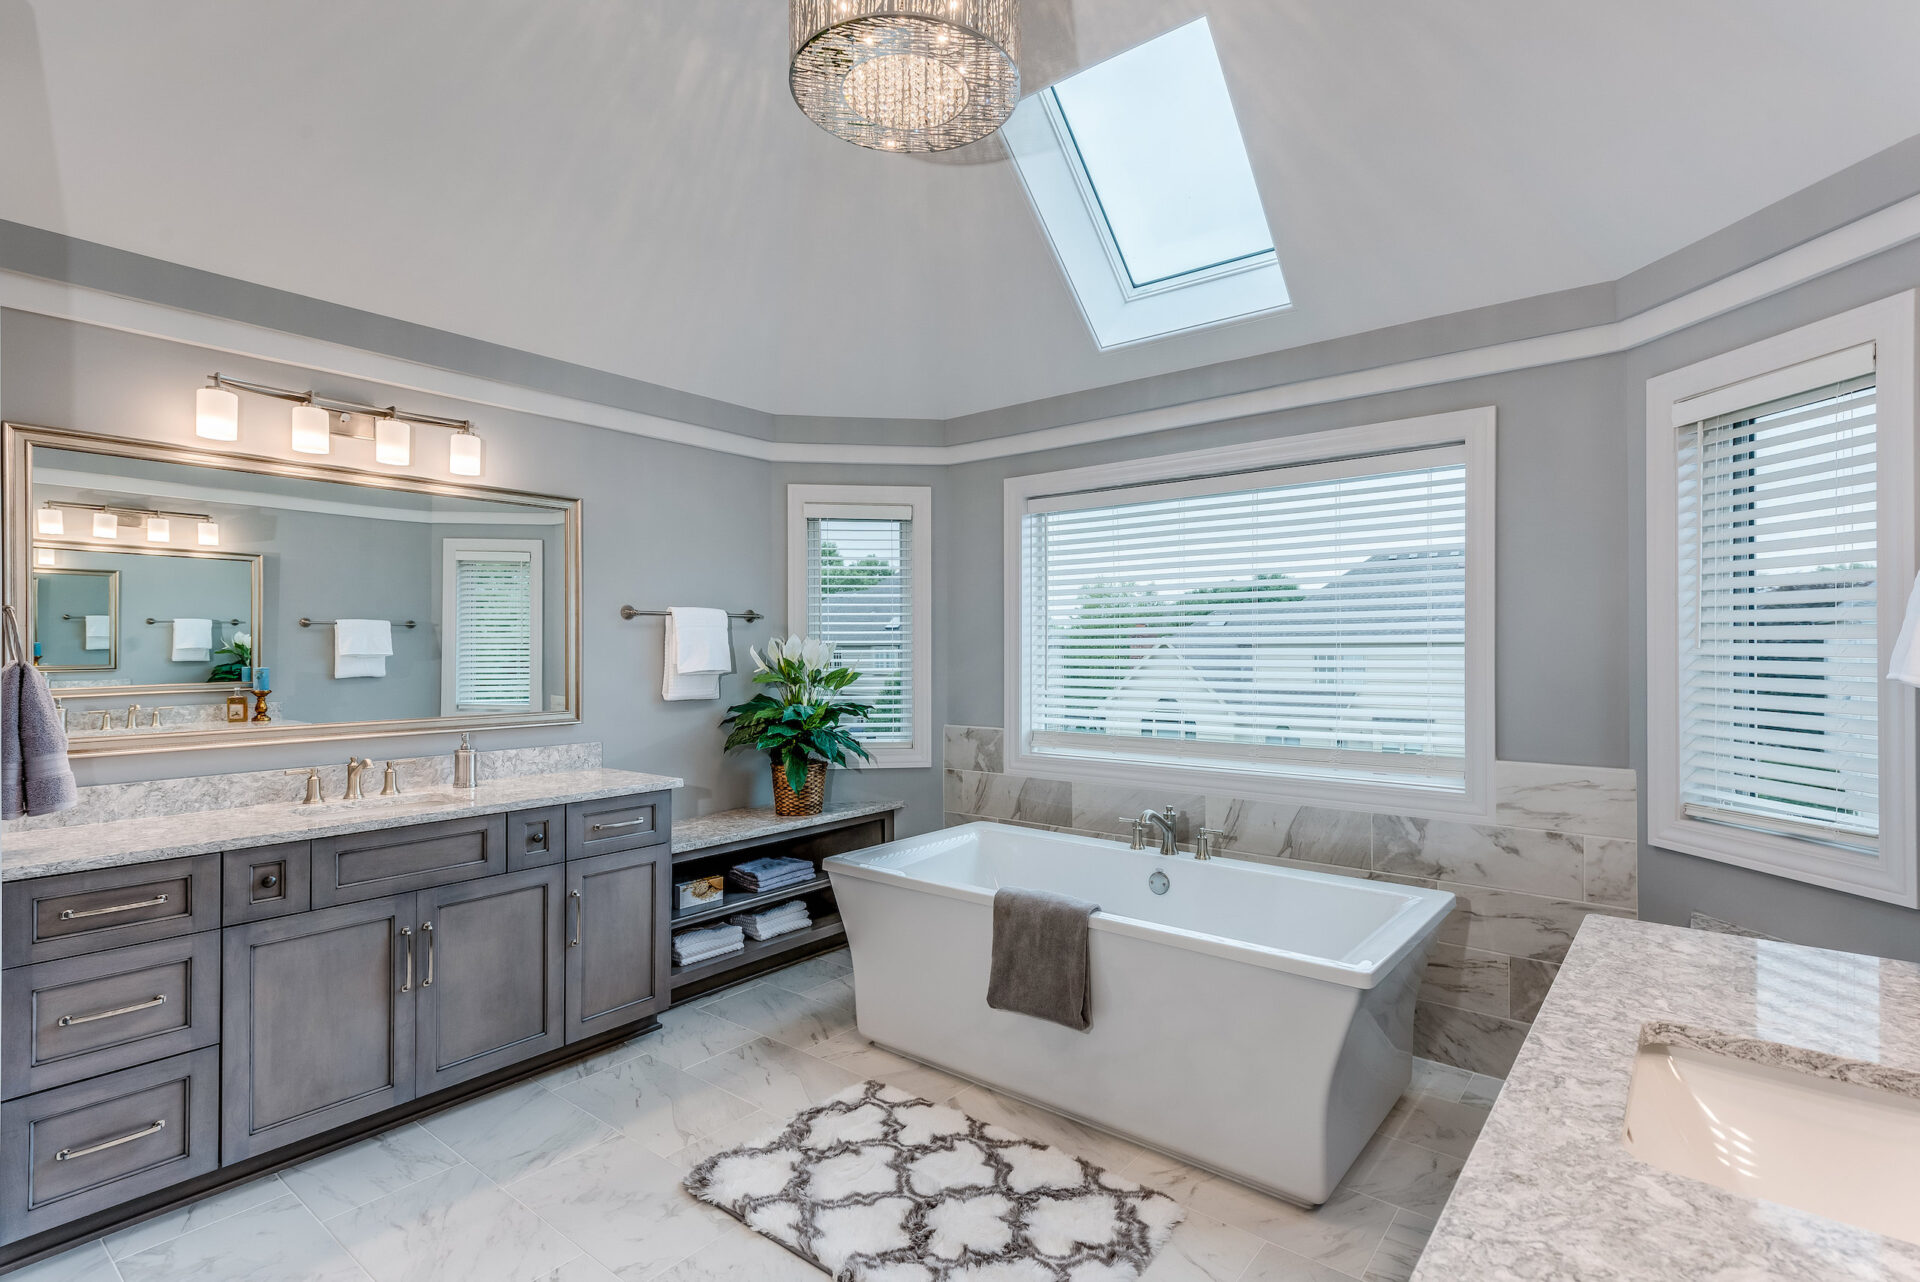 Bathroom master suite with large freestanding tub and skylight window